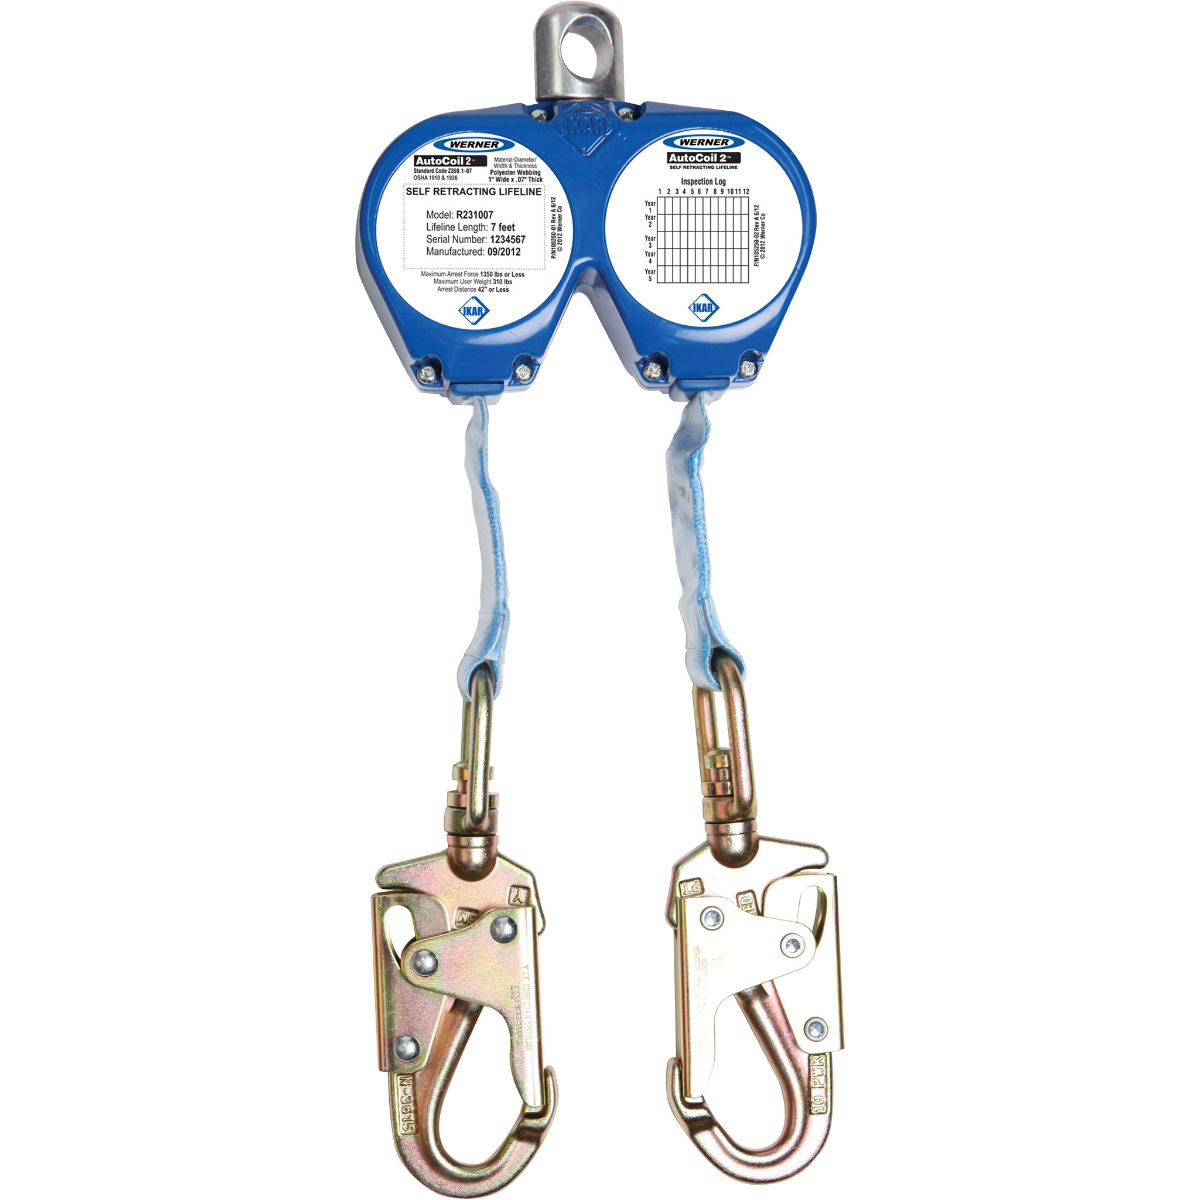 FALL LIMITERS: R-231007 WERNER FALL PROTECTION PRODUCTS